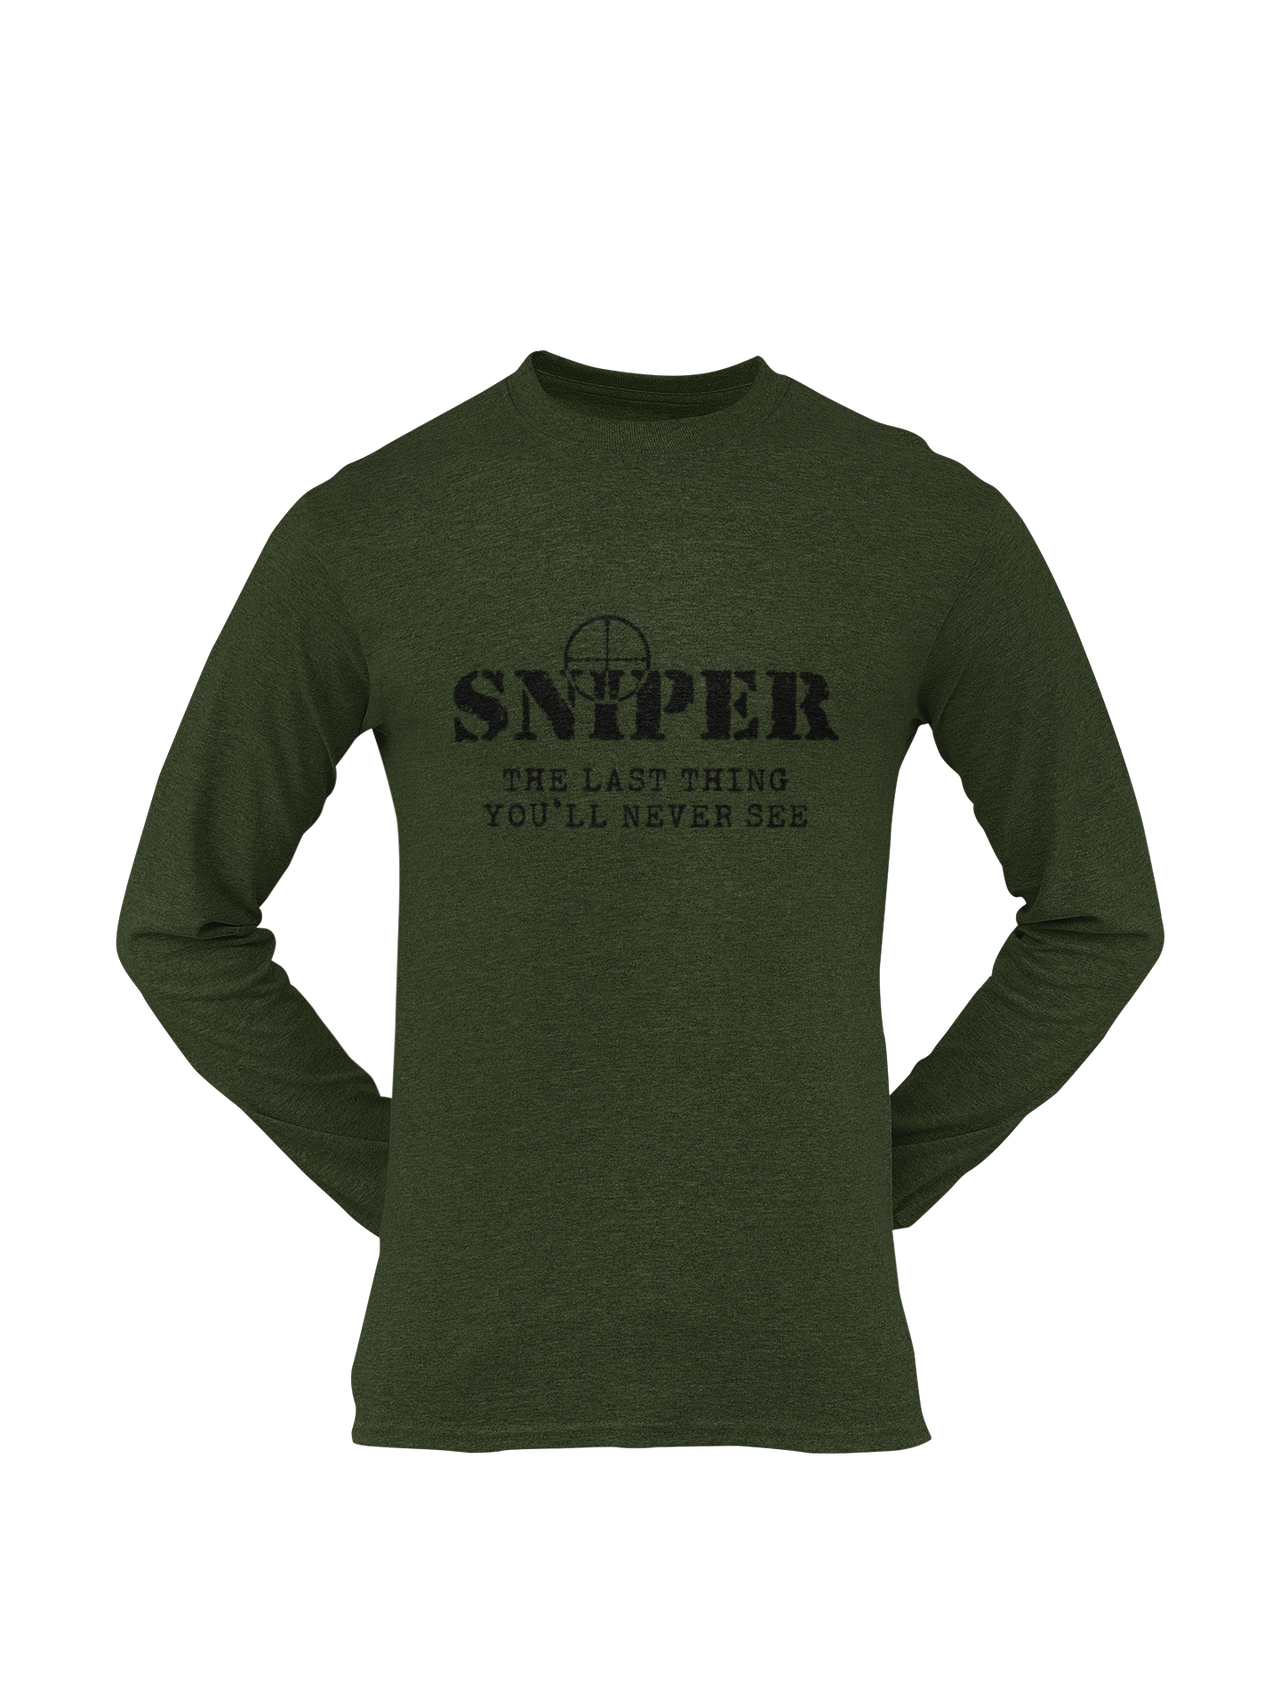 Sniper T-shirt - Sniper, The Last Thing You'll Never See (Men)